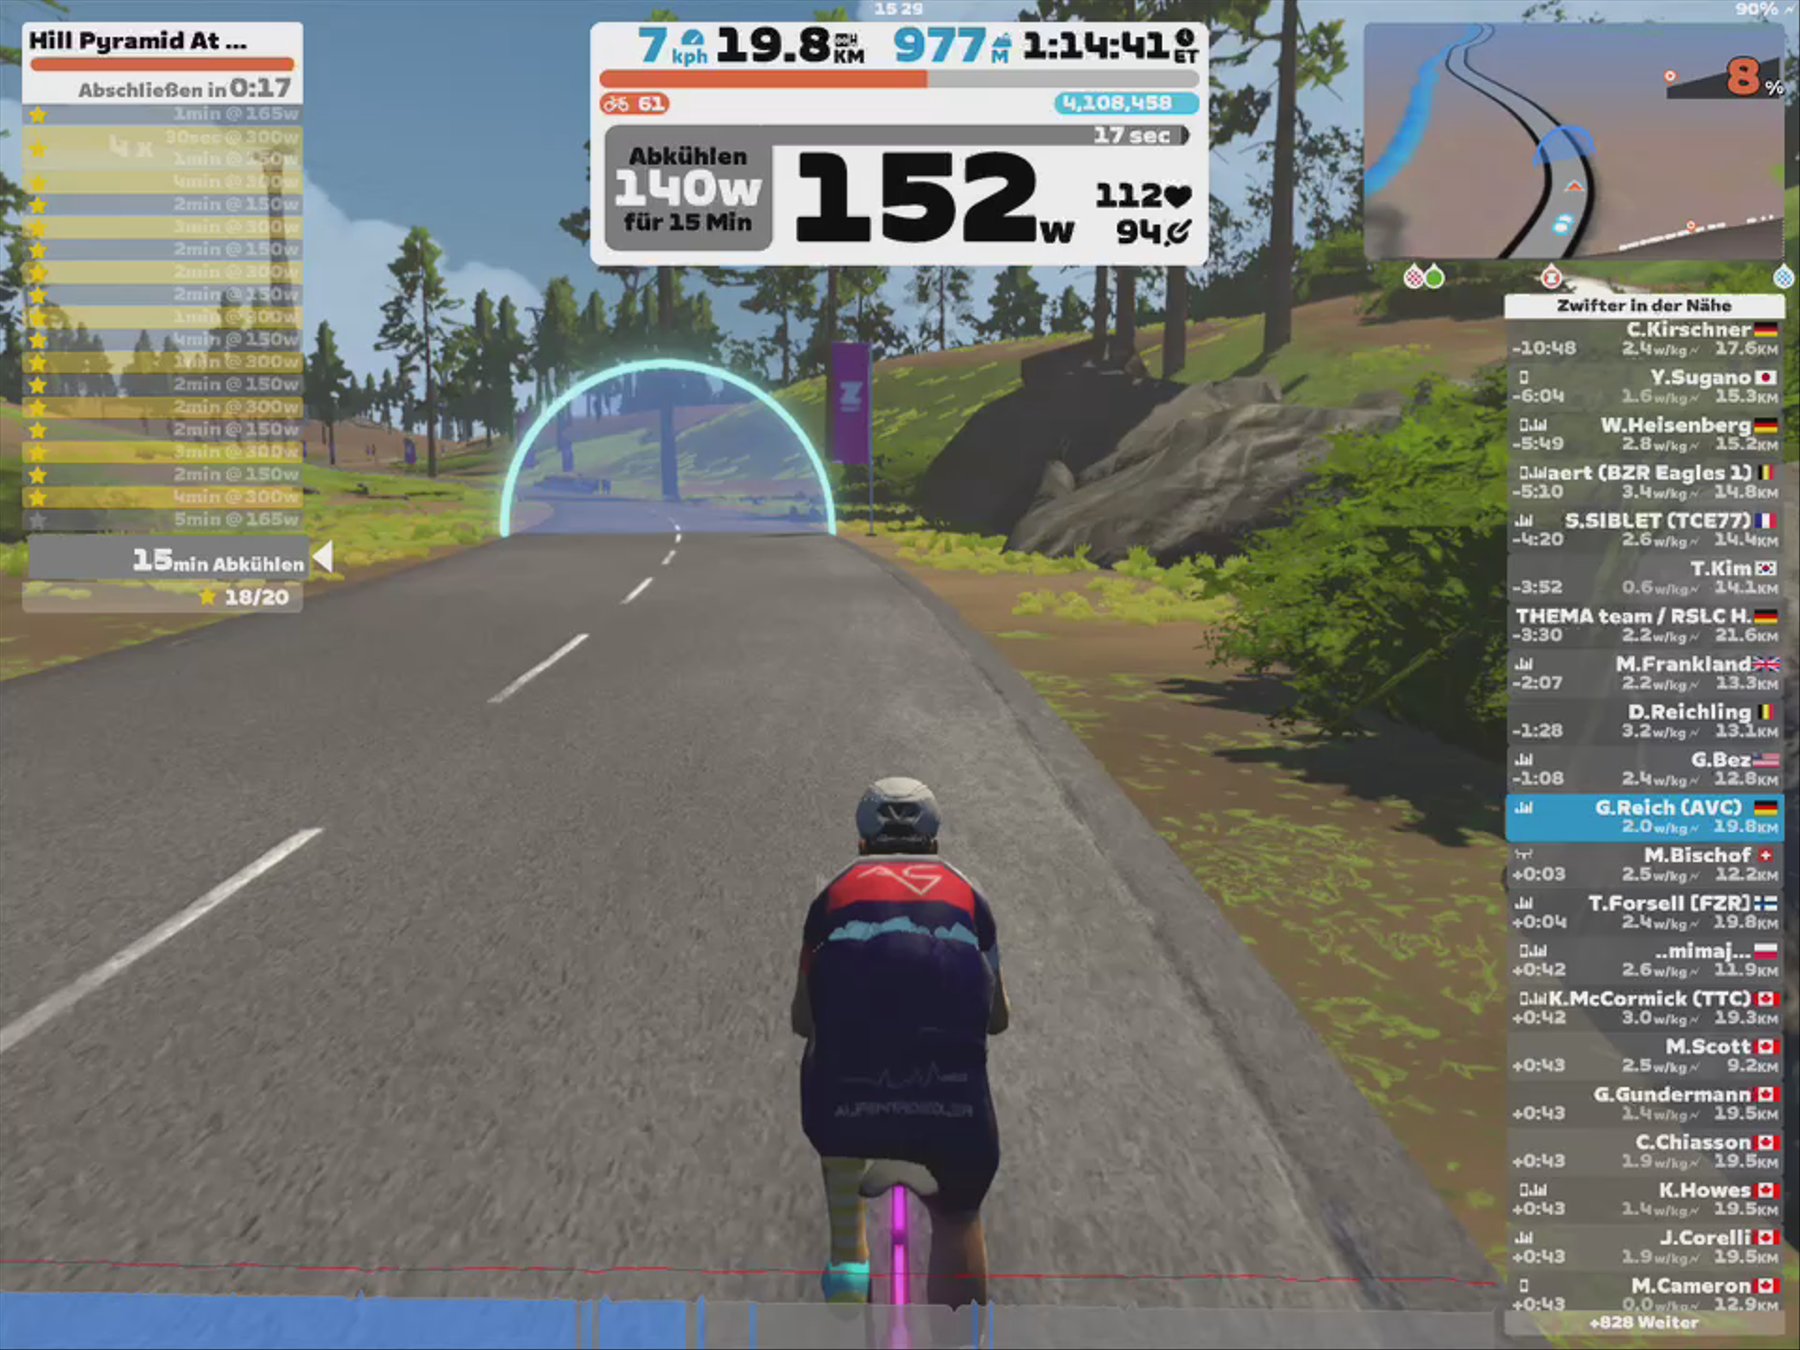 Zwift - Hill Pyramid At Threshold in France